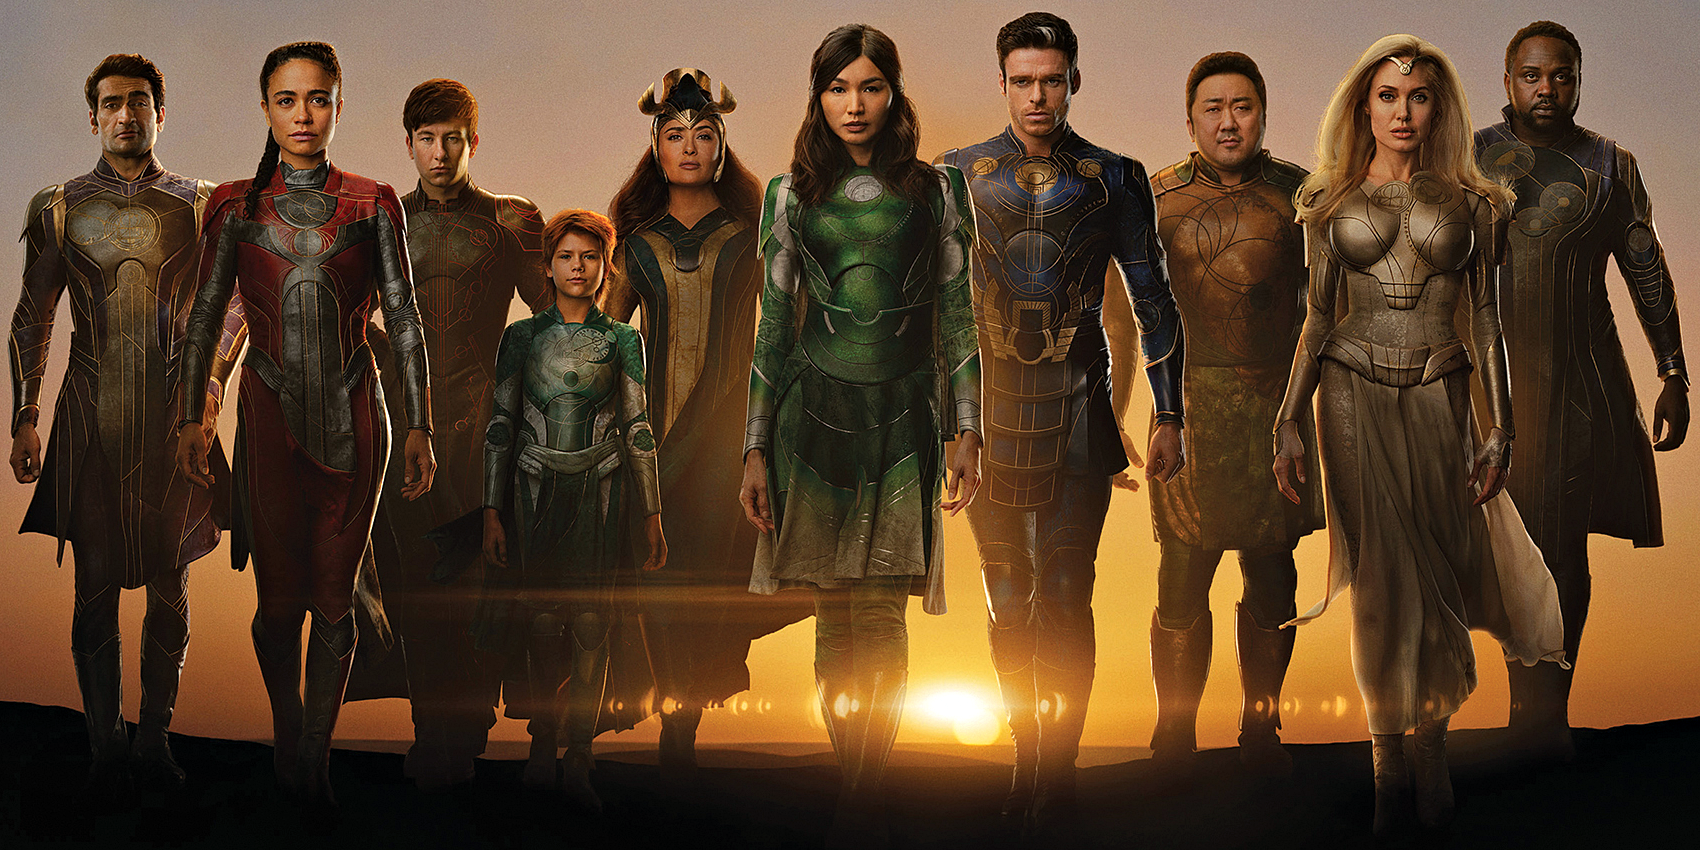 Eternals Cast side by side with the sun rising behind them